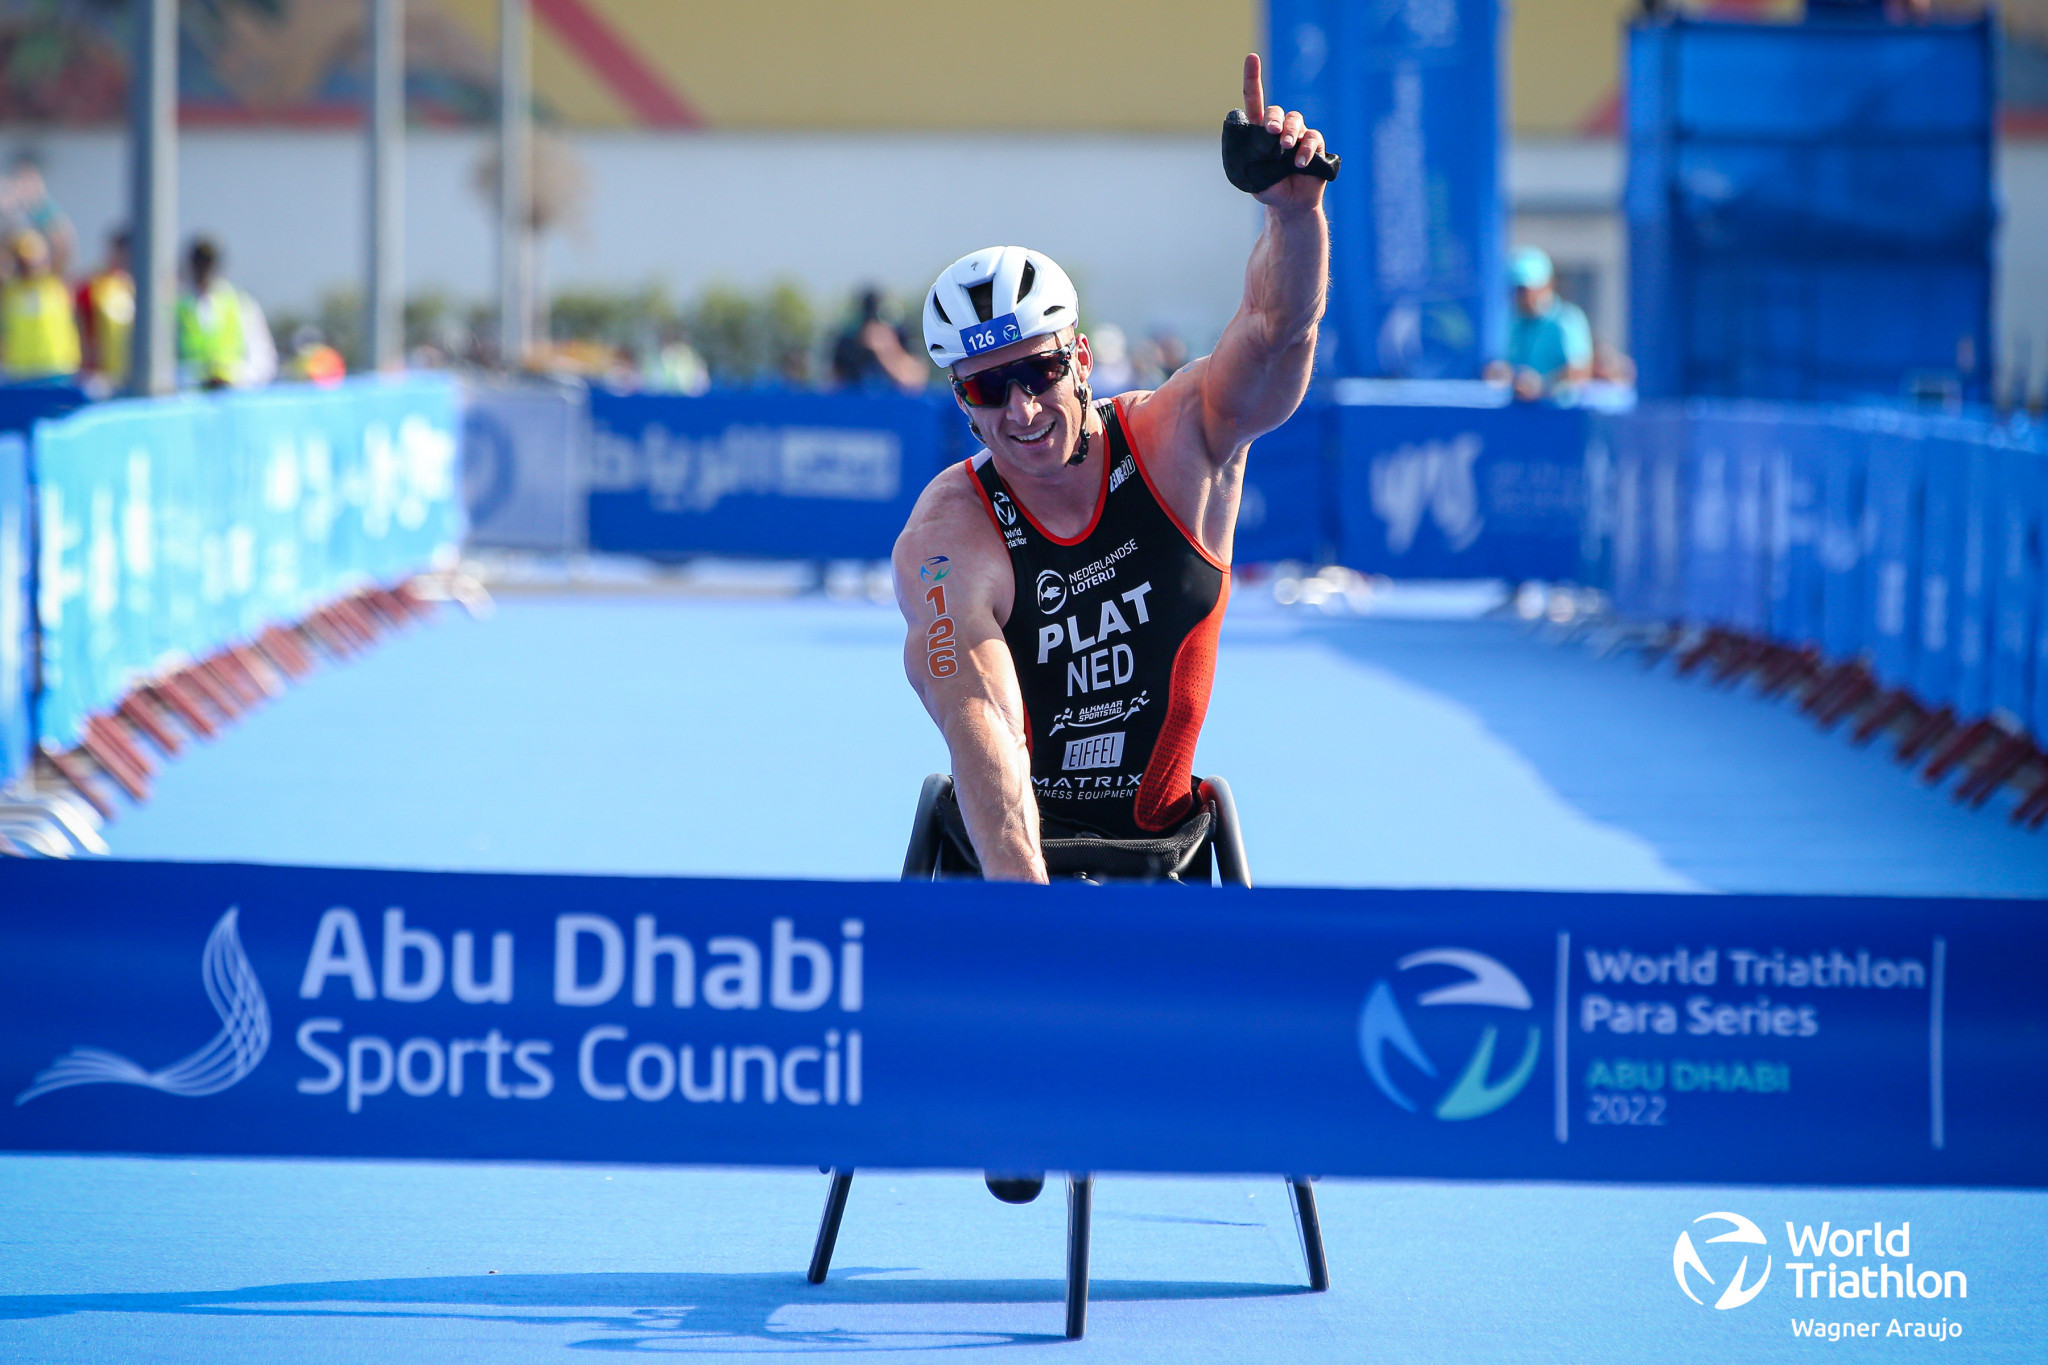 Dutch back-to-back Paralympic champion Jetze Plat dominated the men's wheelchair race to win by more than two minutes ©World Triathlon